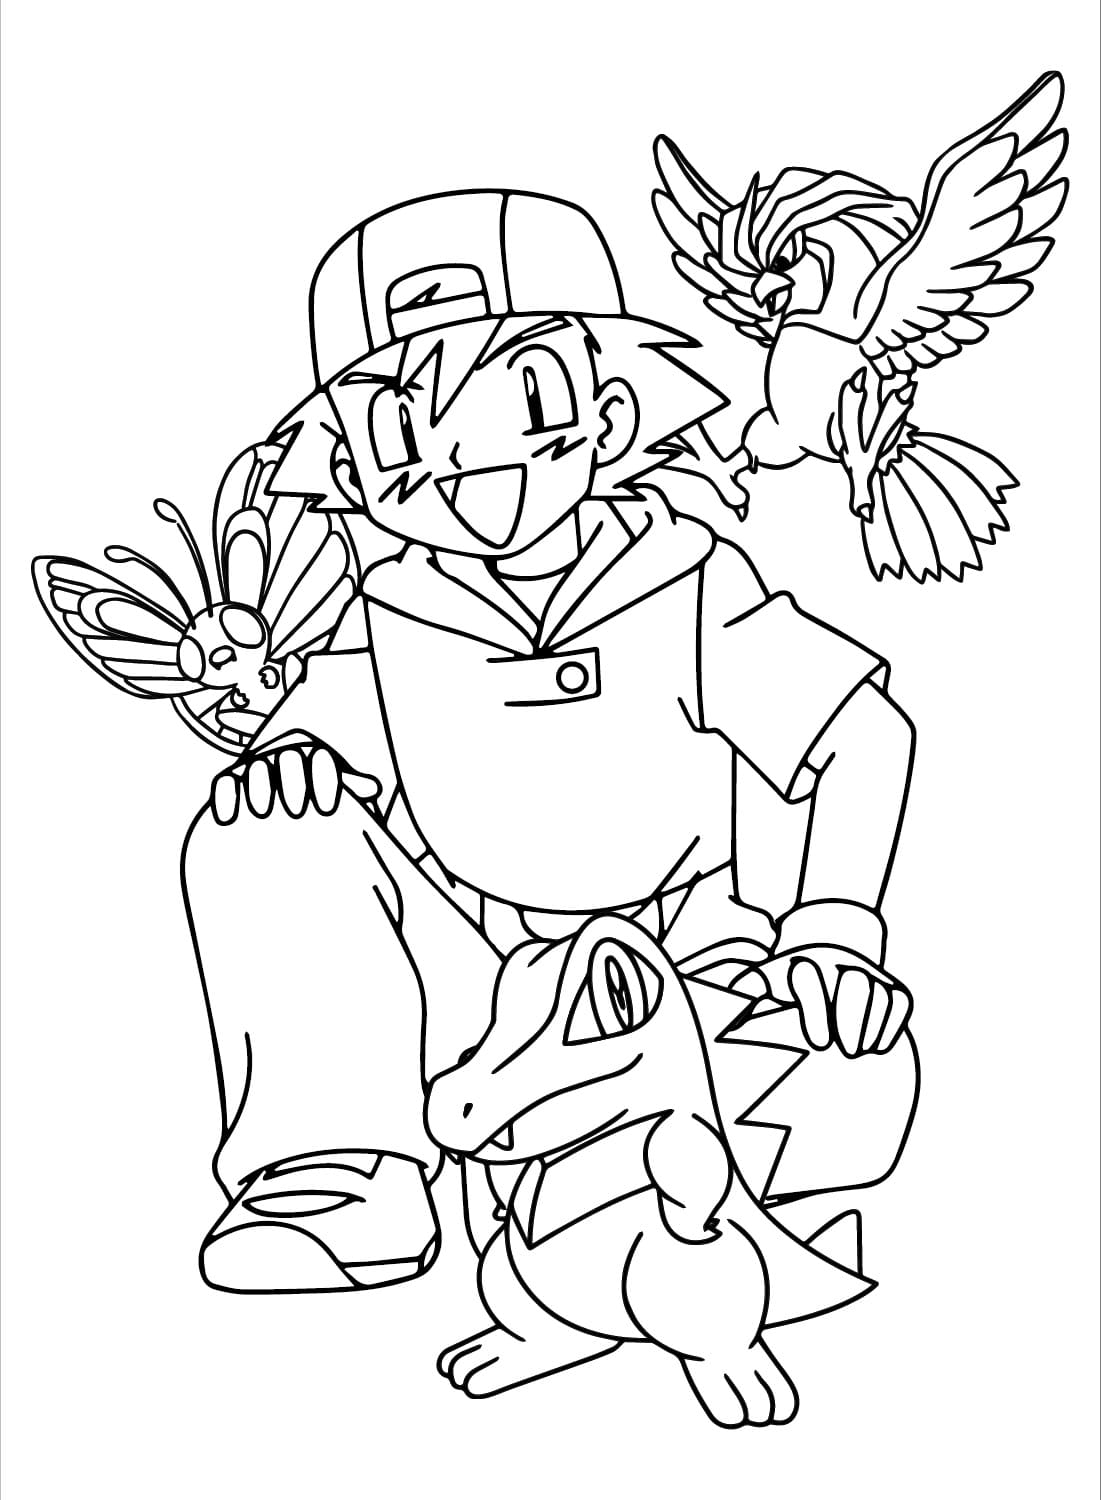 How to Draw Ash Ketchum : 13 Steps - Instructables